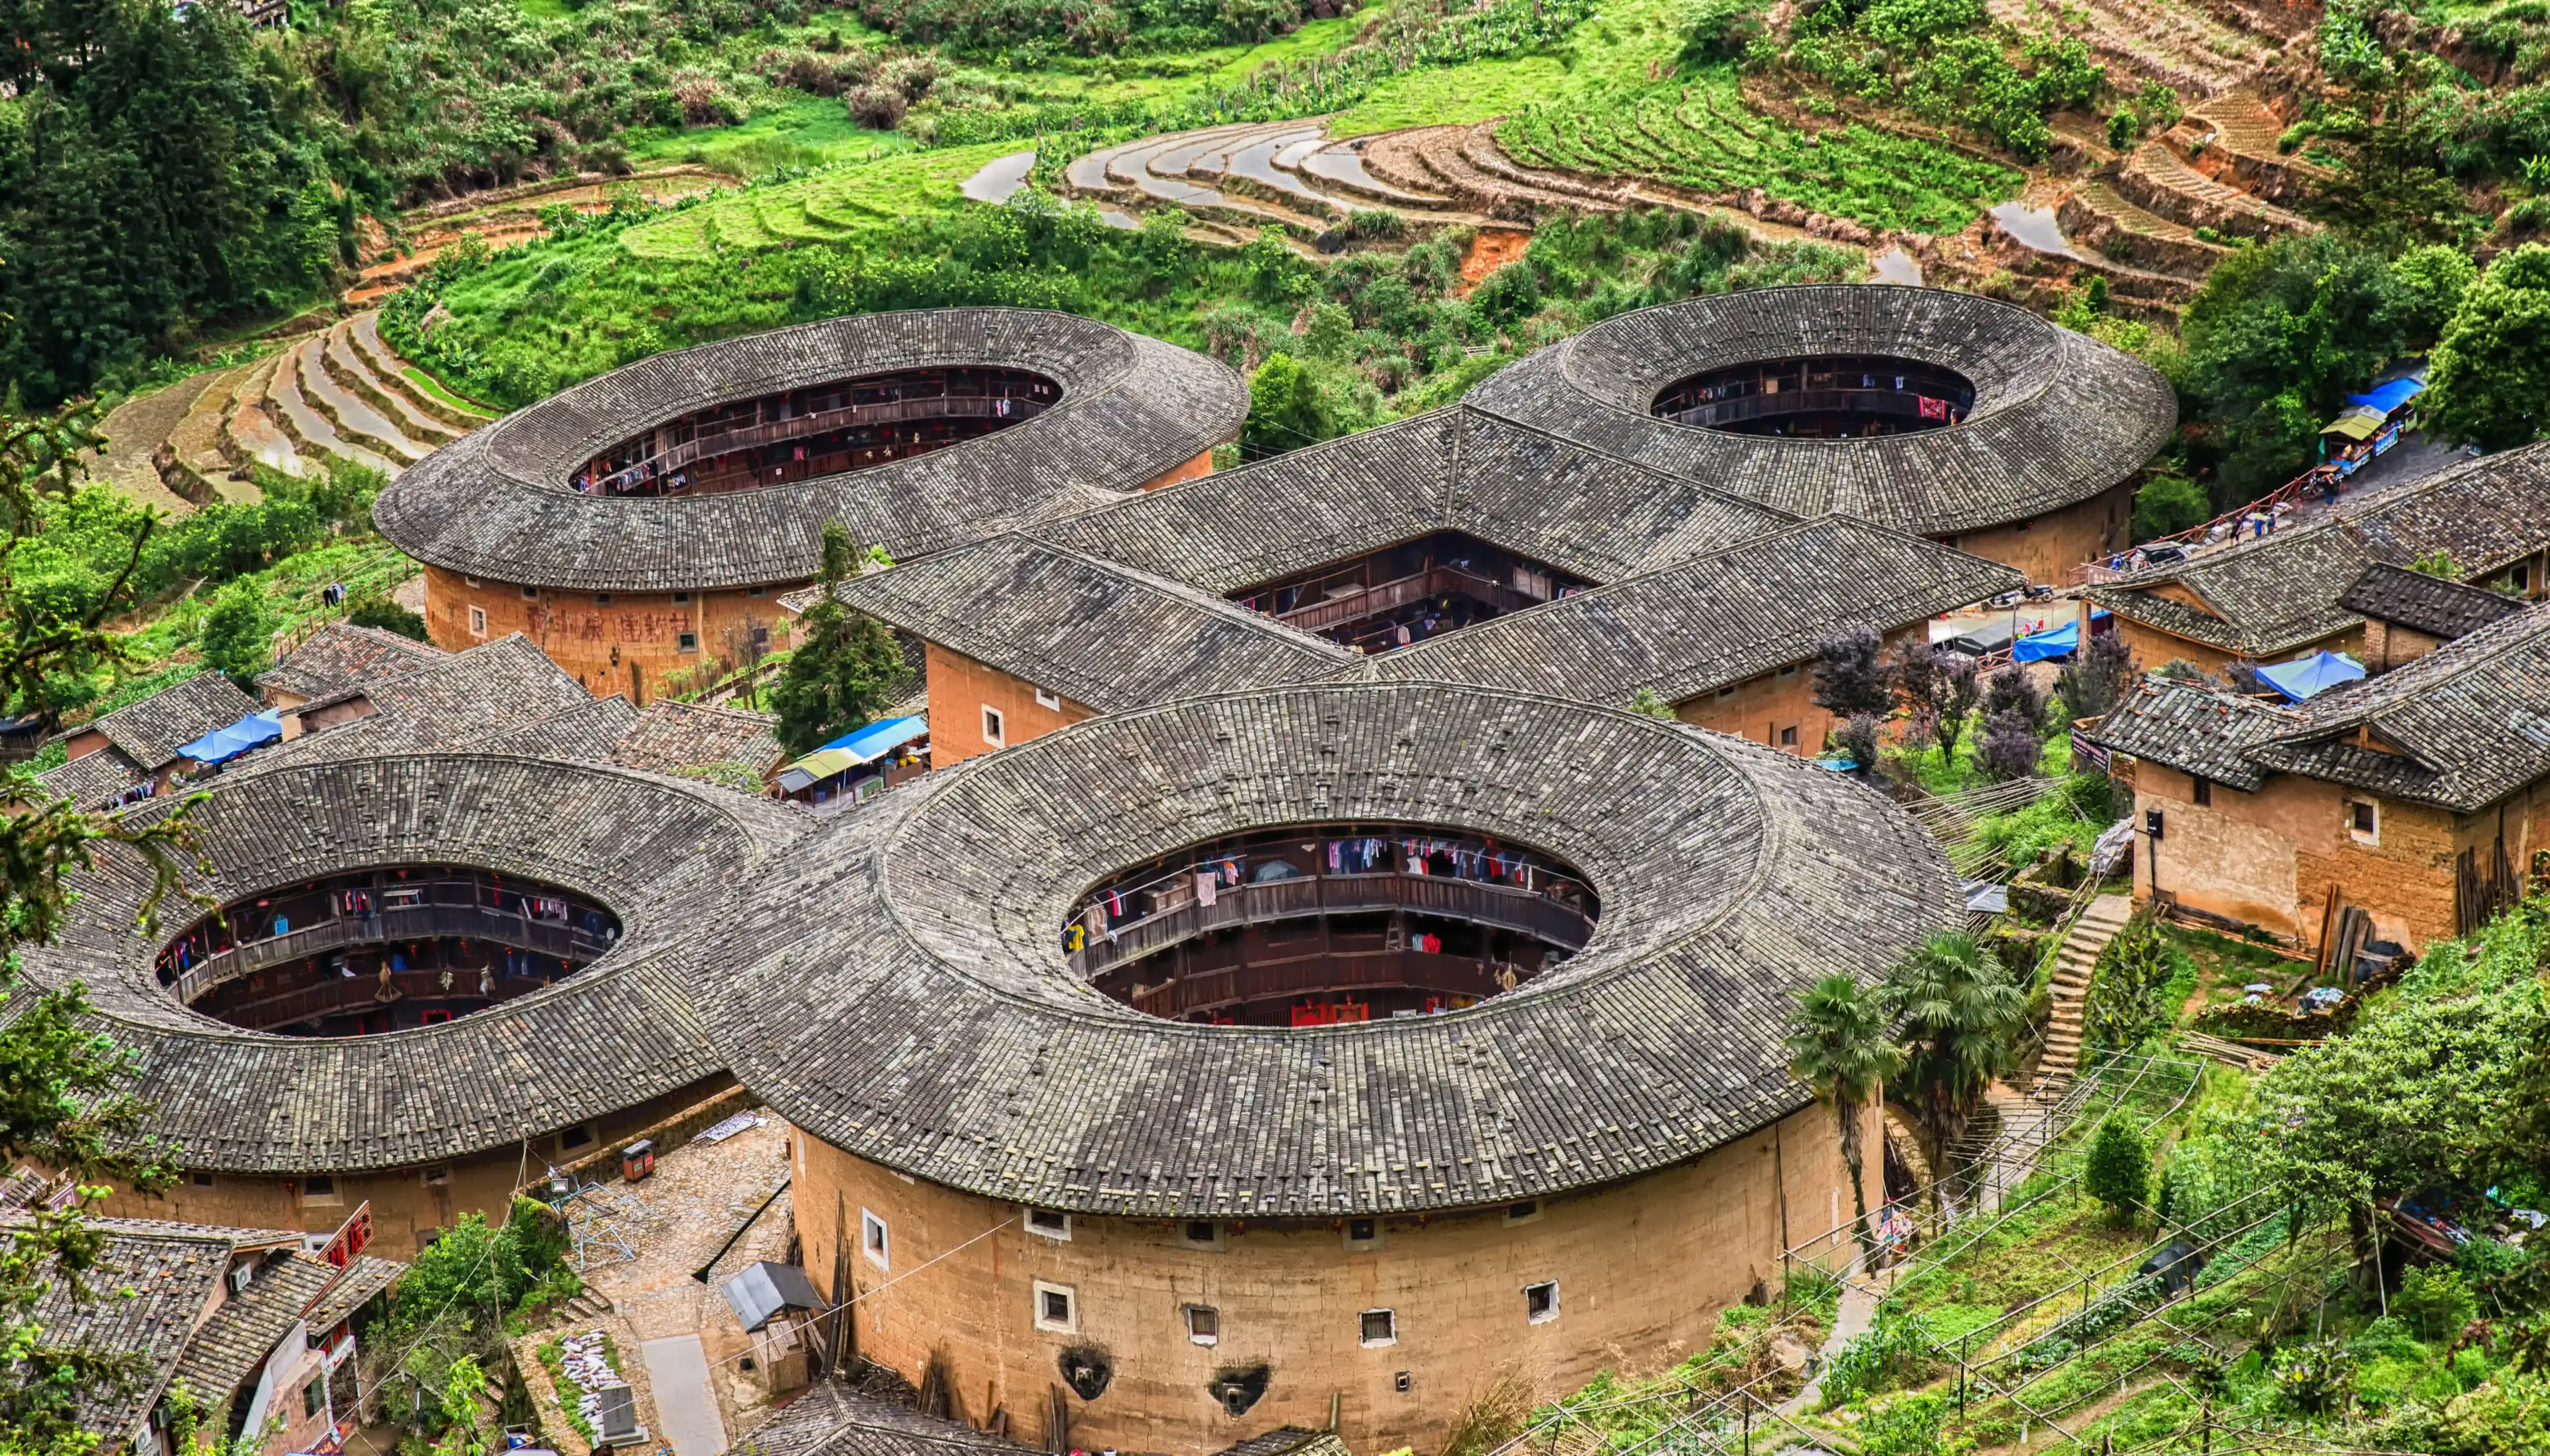 Traditional earthen Tulou Chinese huts, a landmark tourist attraction from the Fujian province of China. These large round huts are still being lived in today by the Hakka people.